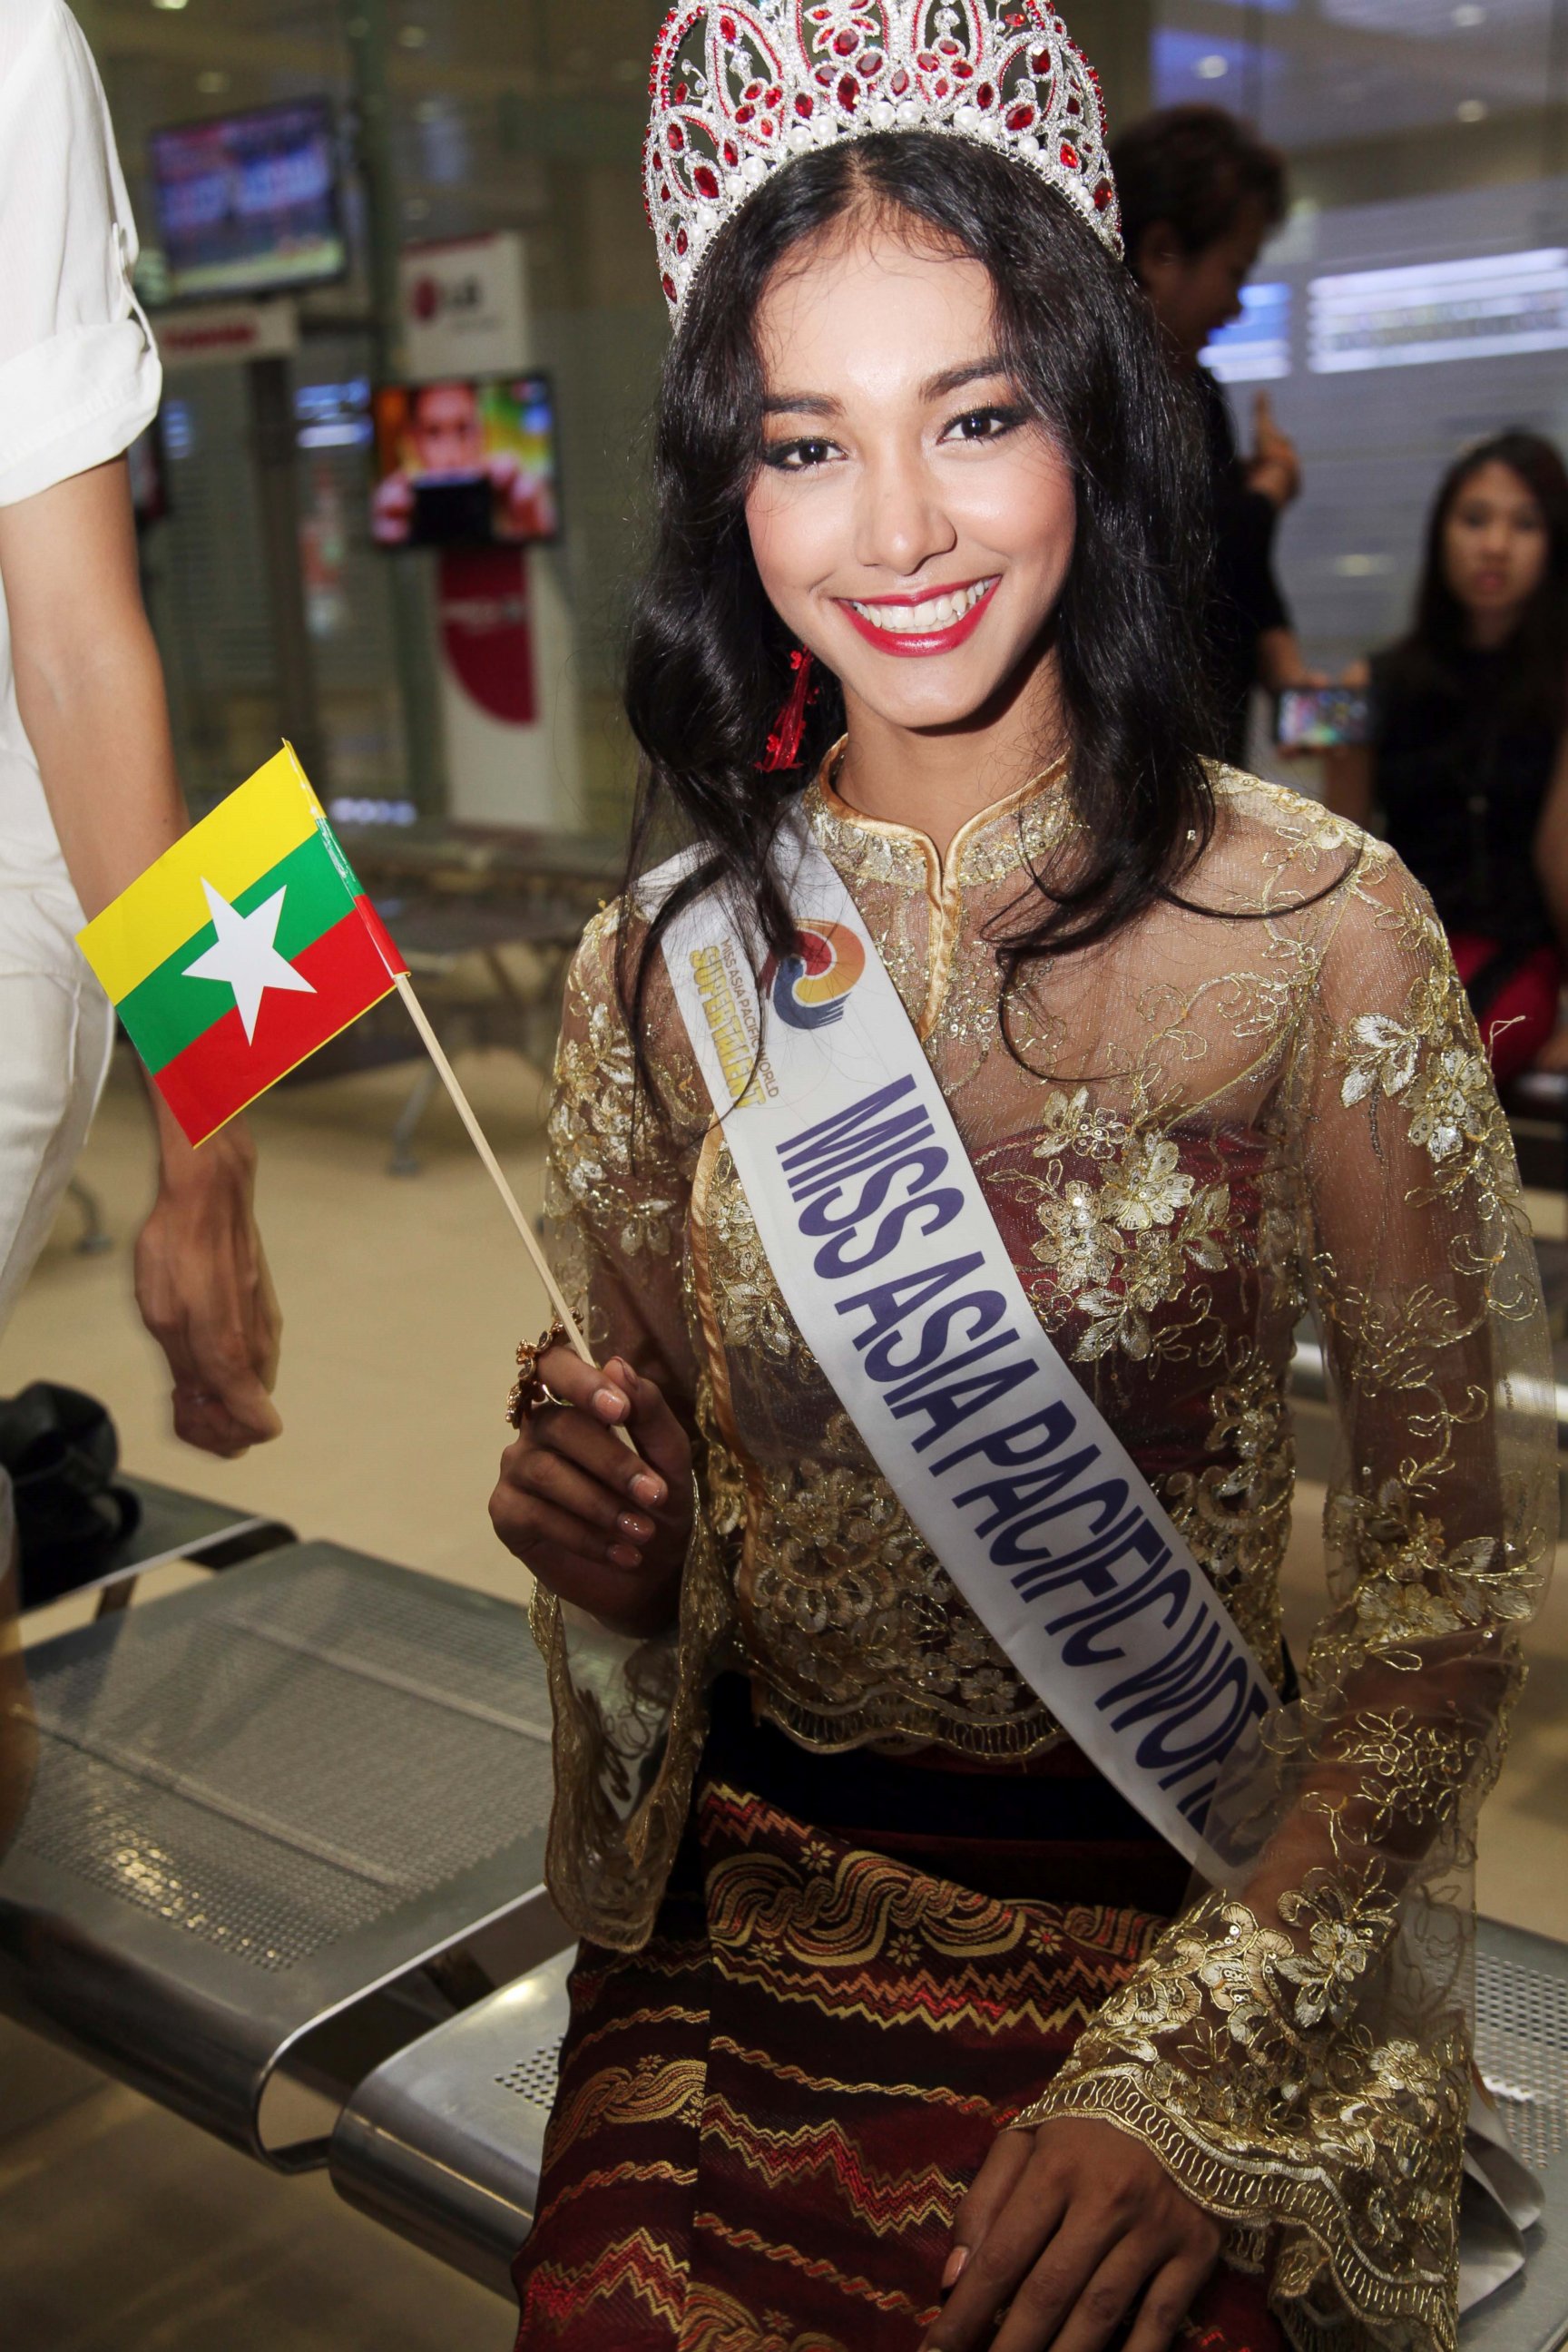 PHOTO: In this June 5, 2014 file photo, Myanmar model May Myat Noe, winner of Miss Asia Pacific World 2014 pageant, waves a miniature flag of the country upon her arrival at Yangon International Airport in Yangon, Myanmar. 